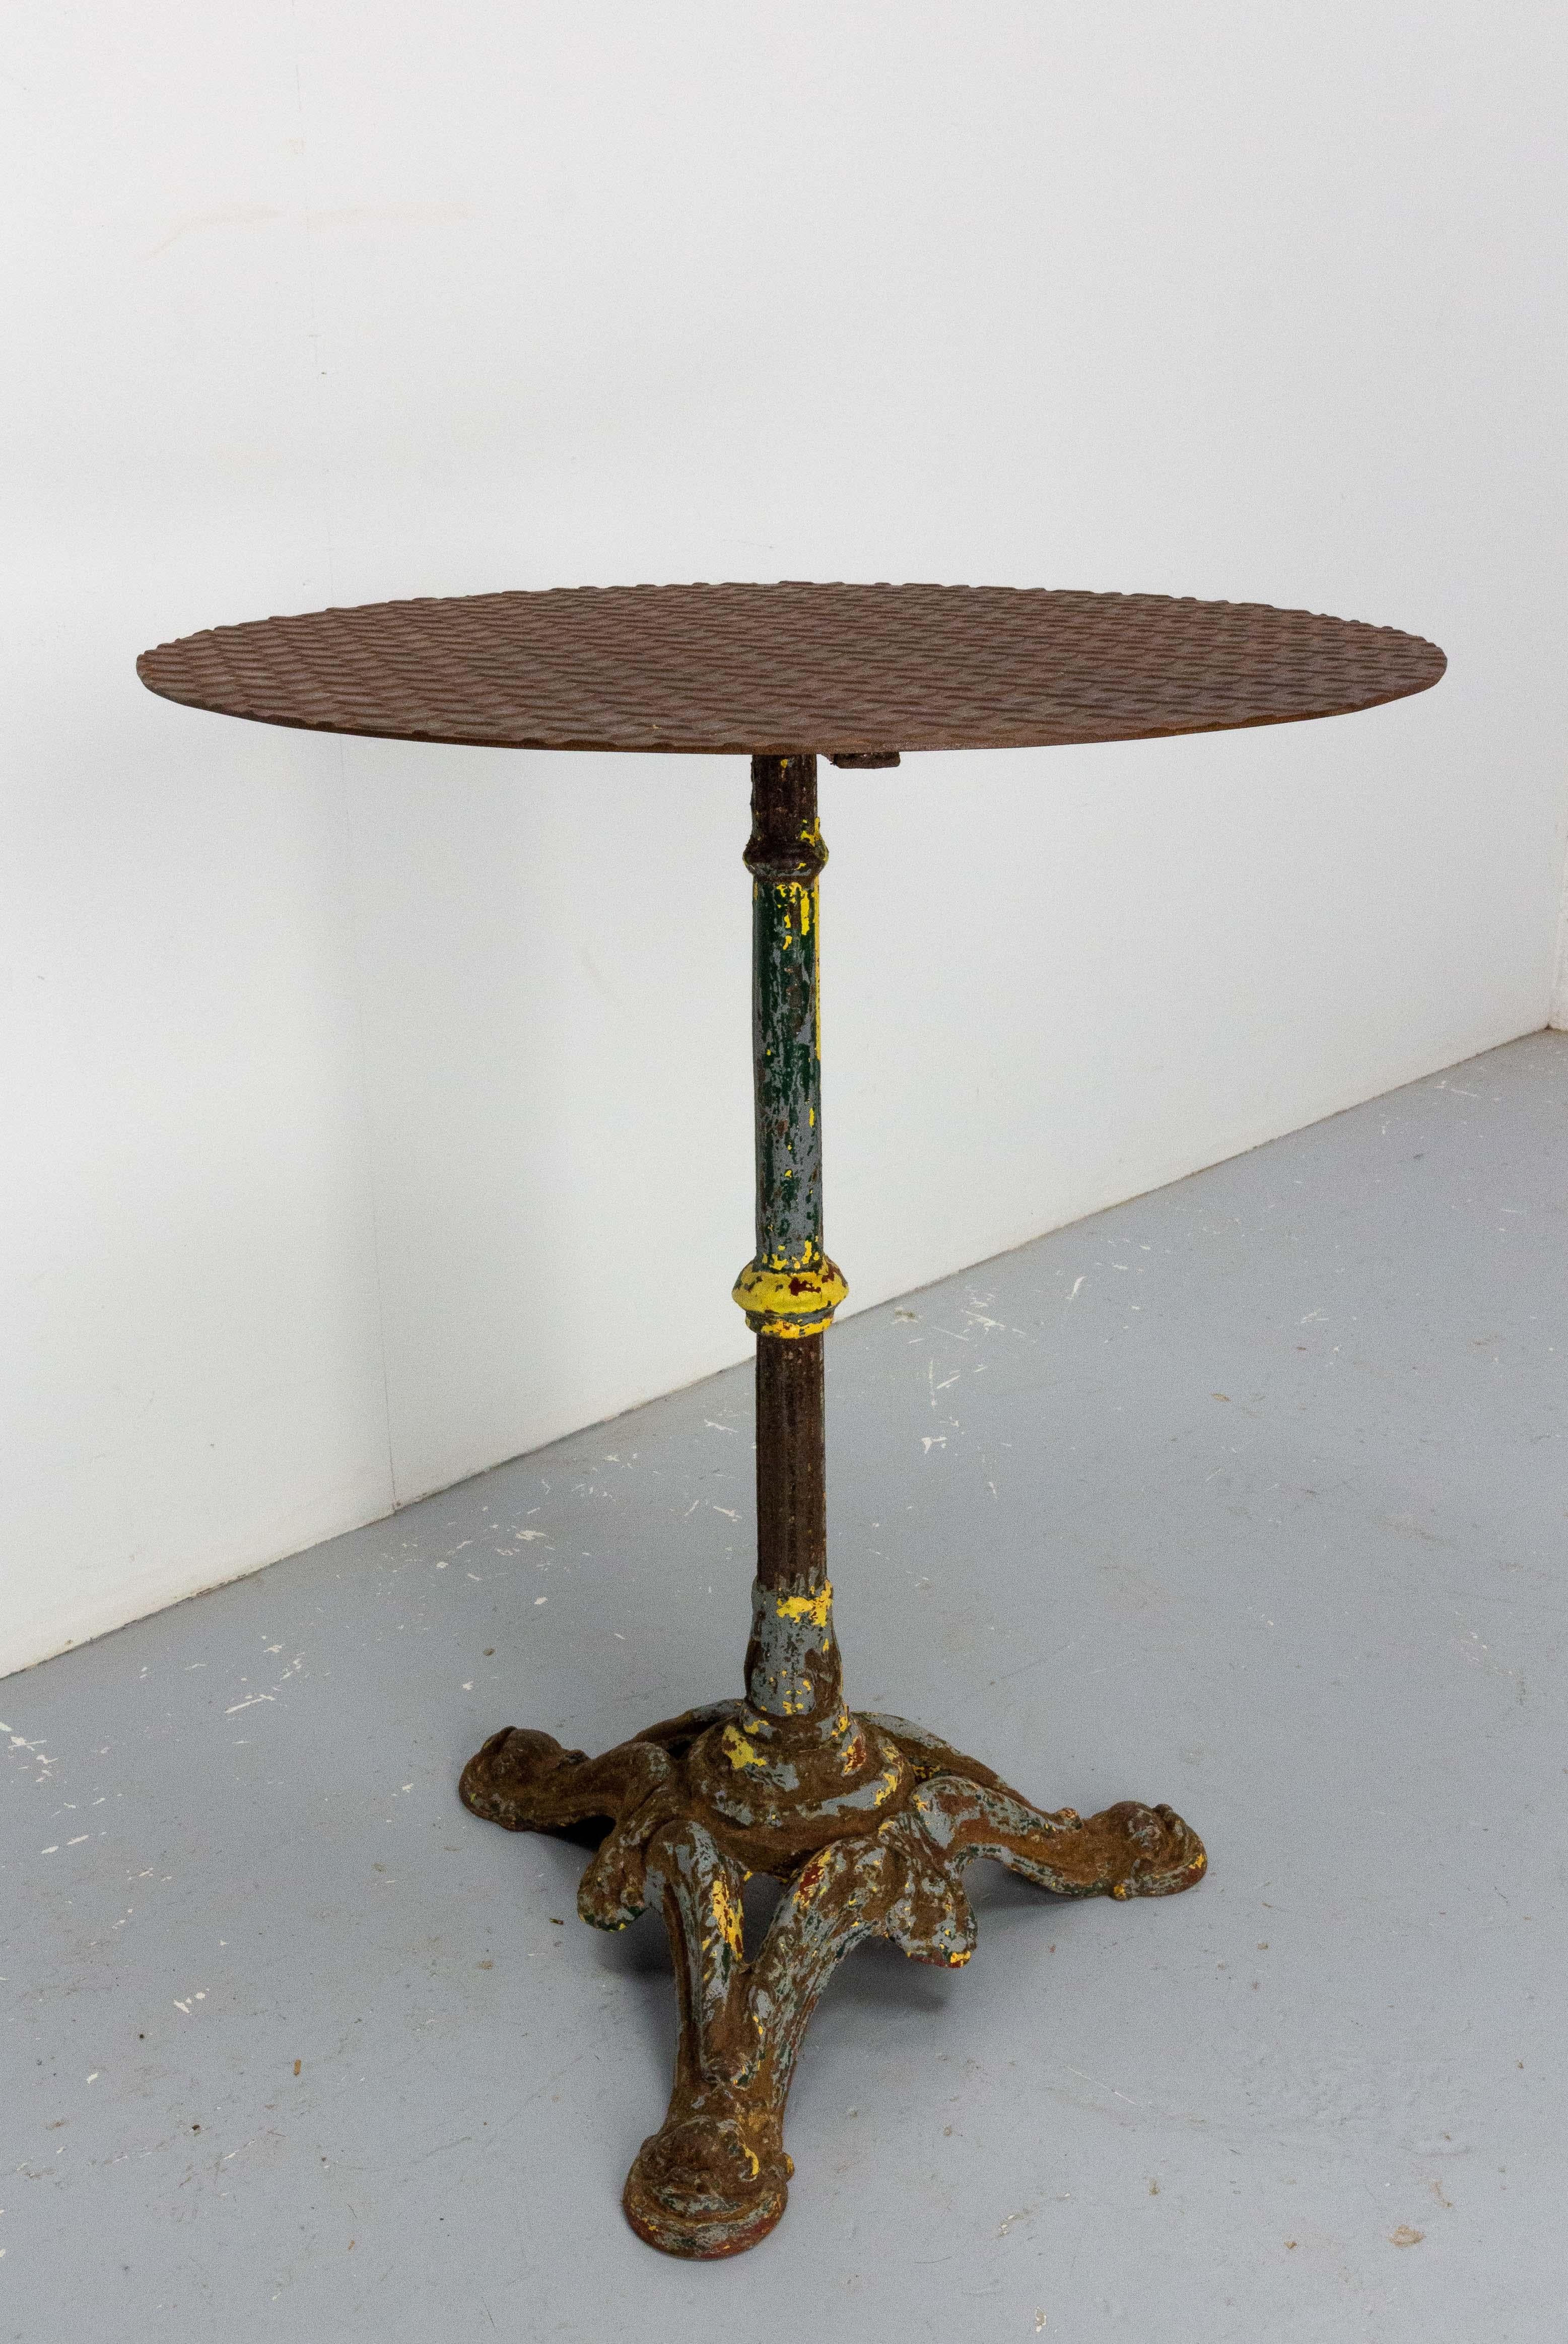 Belle Époque French Bistro or Coffee Table Metal Top & Wrought Iron Foot, Late 19th Century For Sale